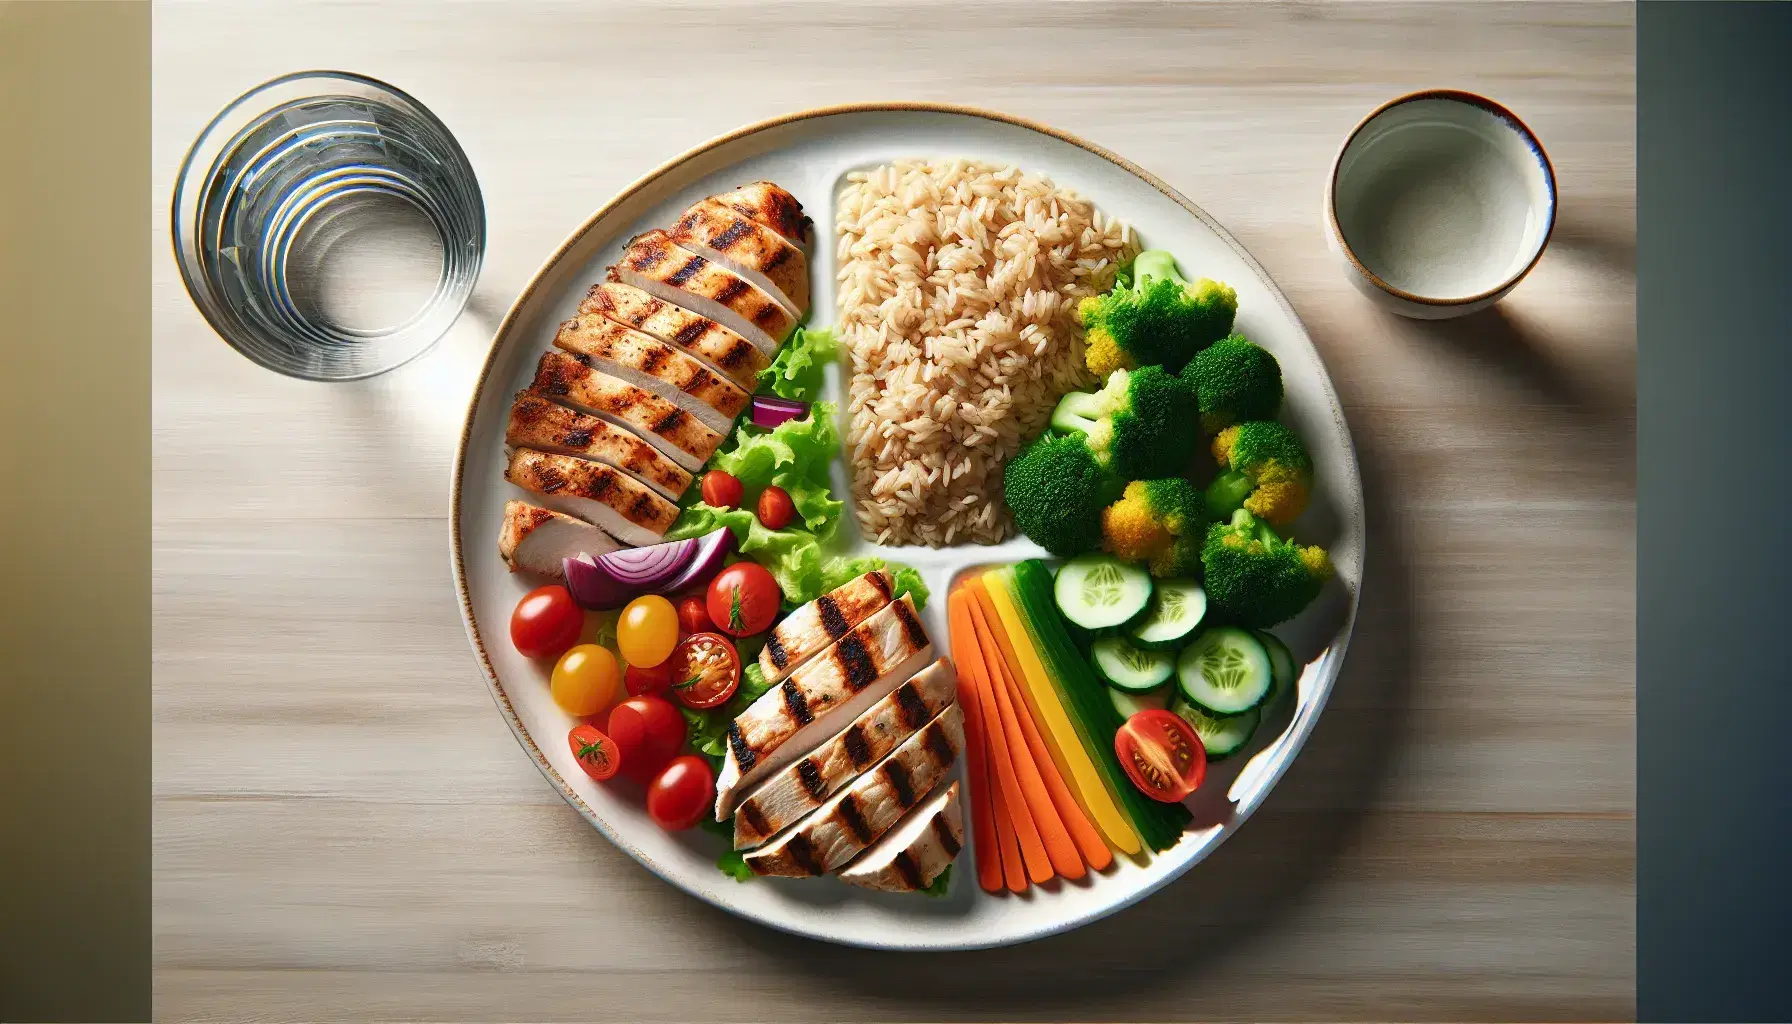 Round plate with balanced meal: grilled chicken breast, brown rice, steamed vegetables and mixed salad, with glass of water and cutlery.